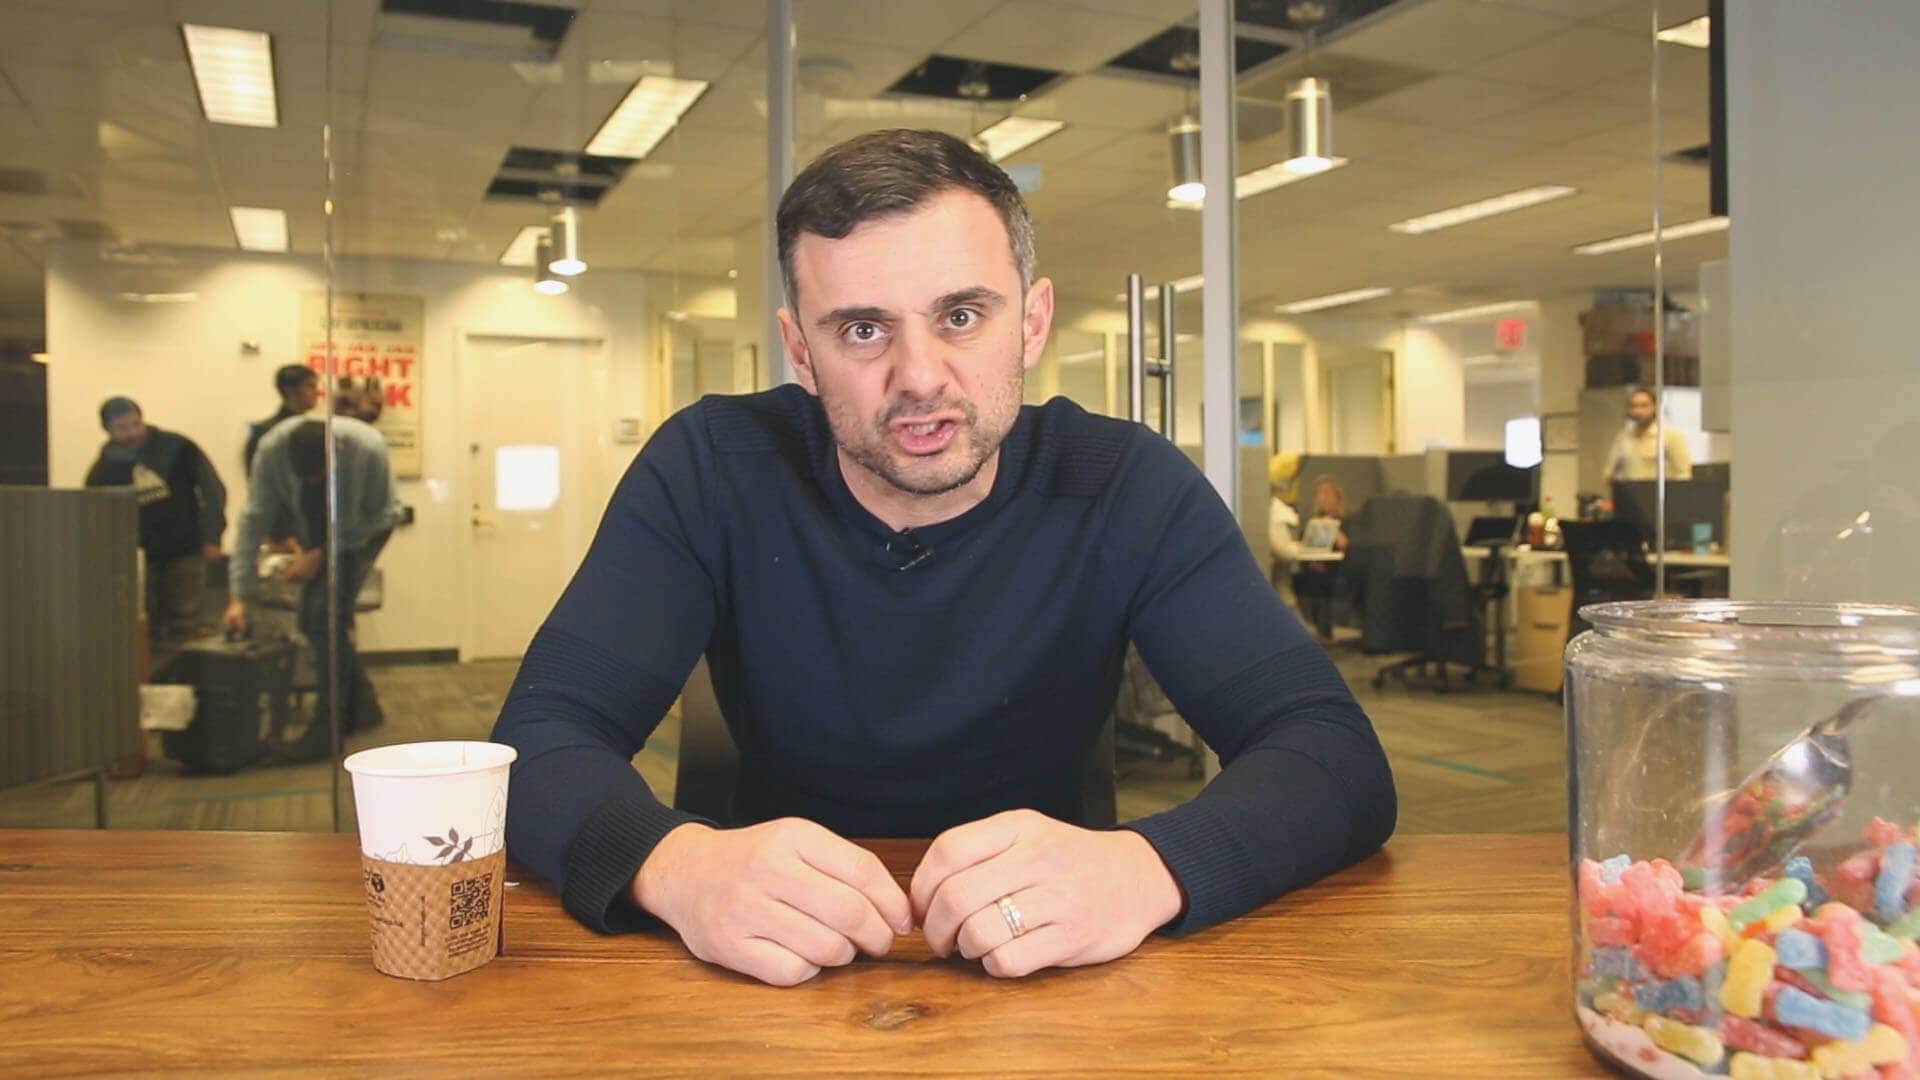 Twitter Users, How to Ask for Help & Beating Jet Lag: #AskGaryVee Episode 180